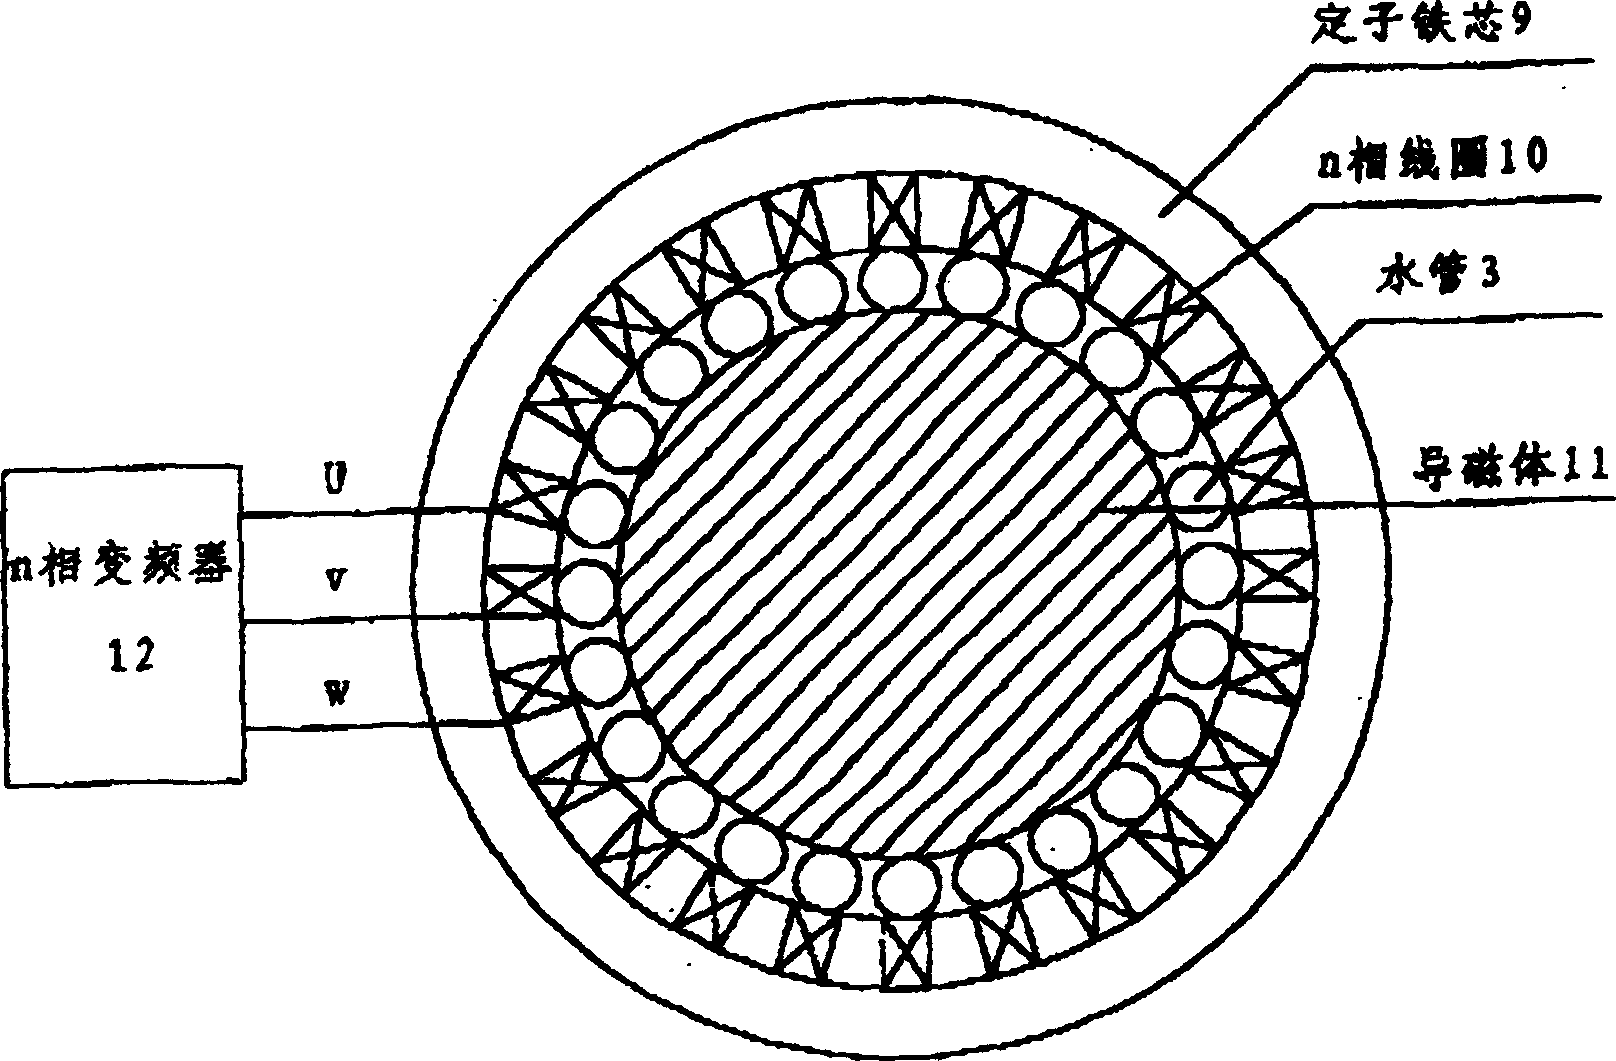 Water magnetizing device